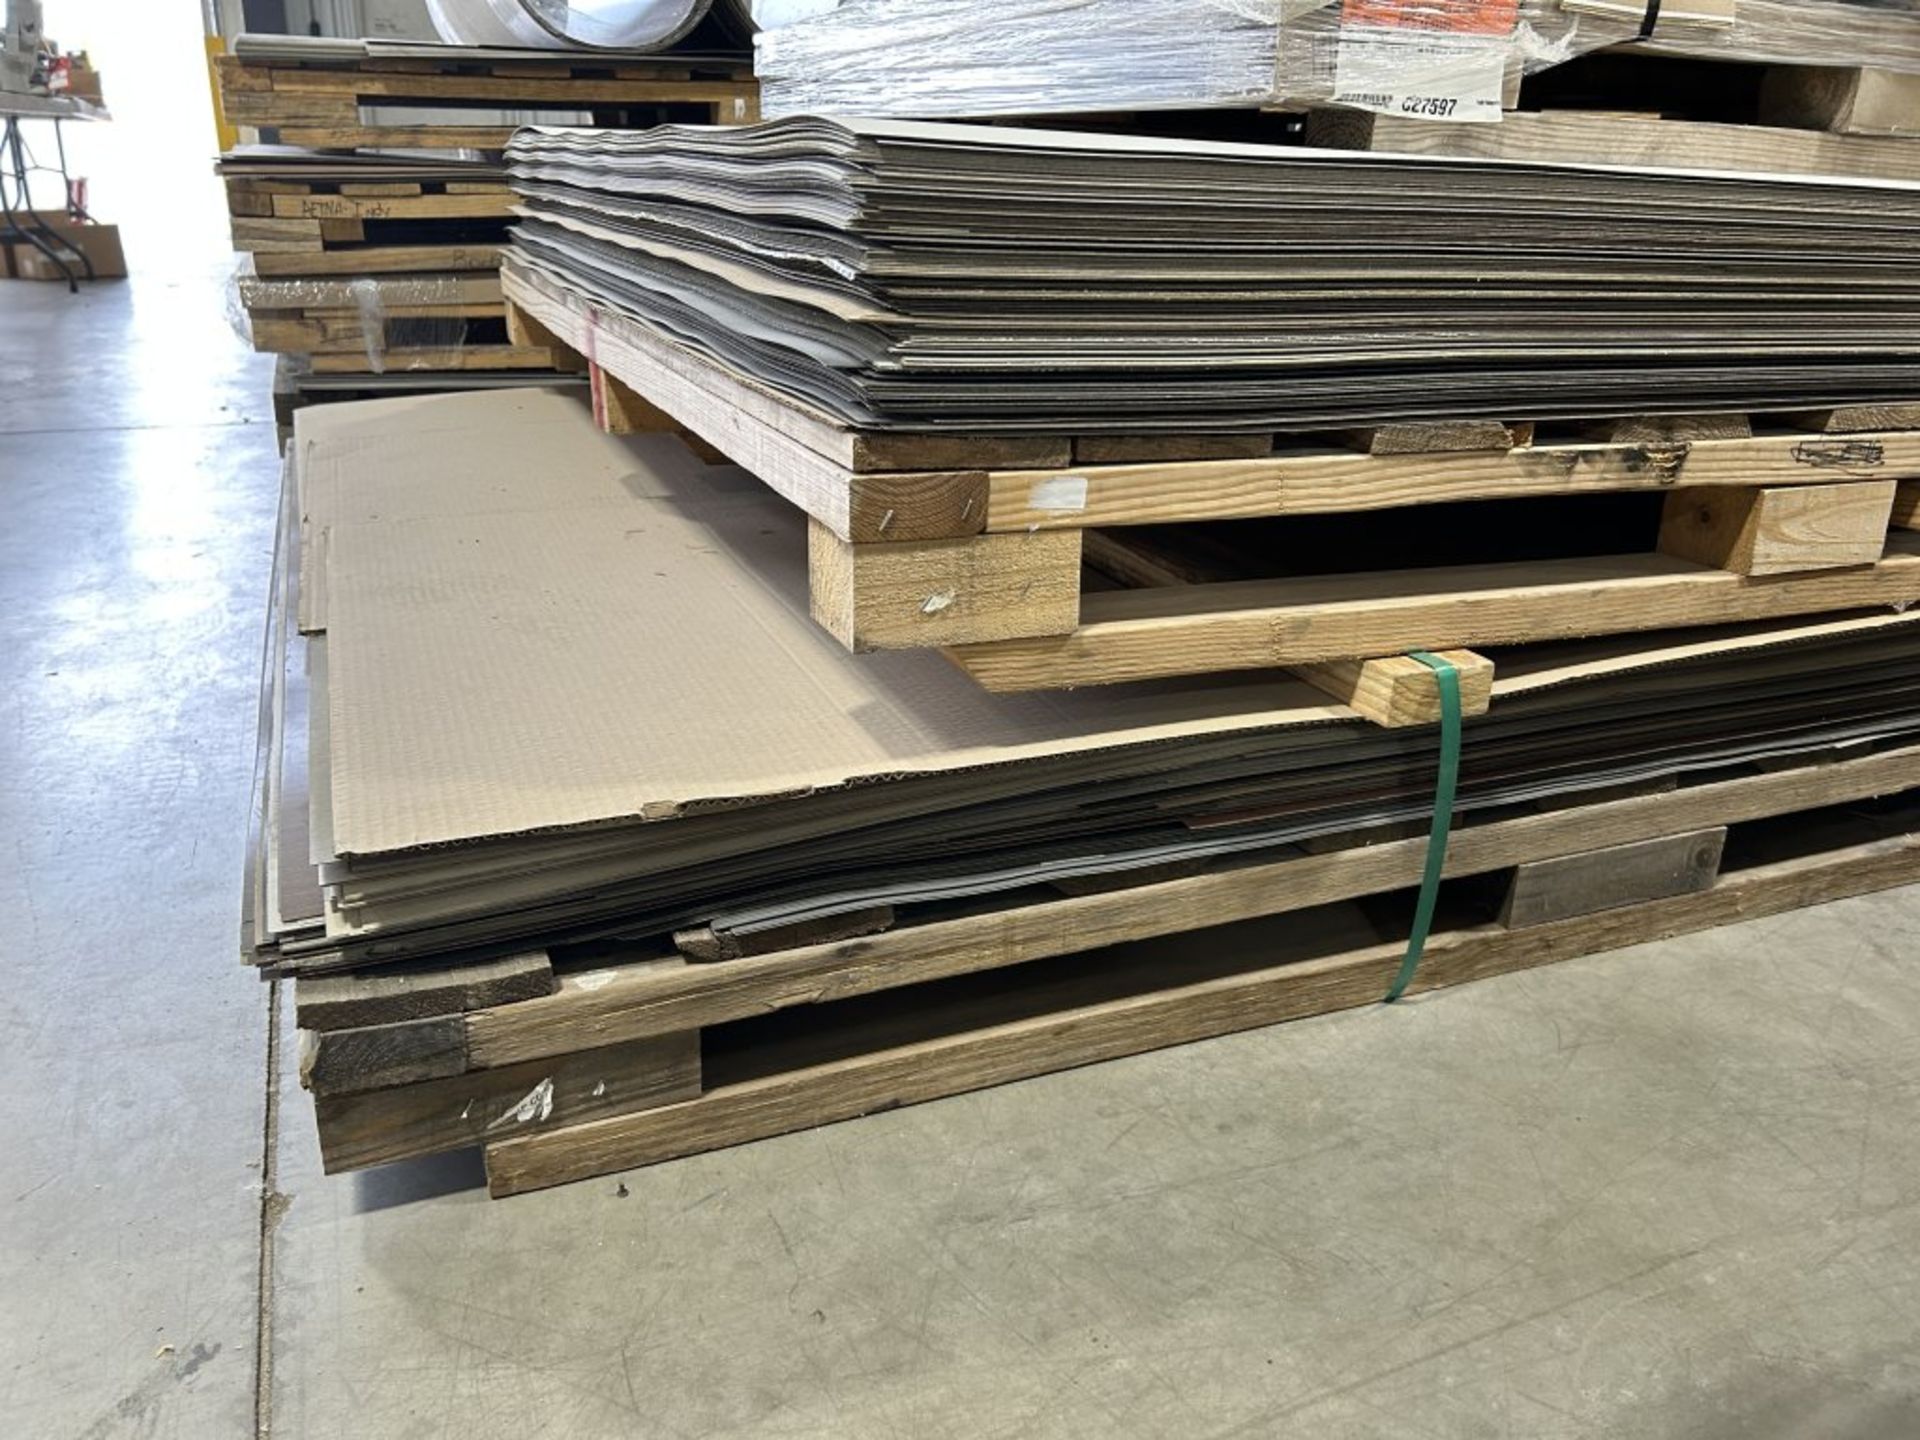 LARGE PILE OF ASSORTED LAMINATE SHEETS, APPROX. 150 SEETS TOTAL, VARIOUS COLORS AND SIZES - Image 9 of 9